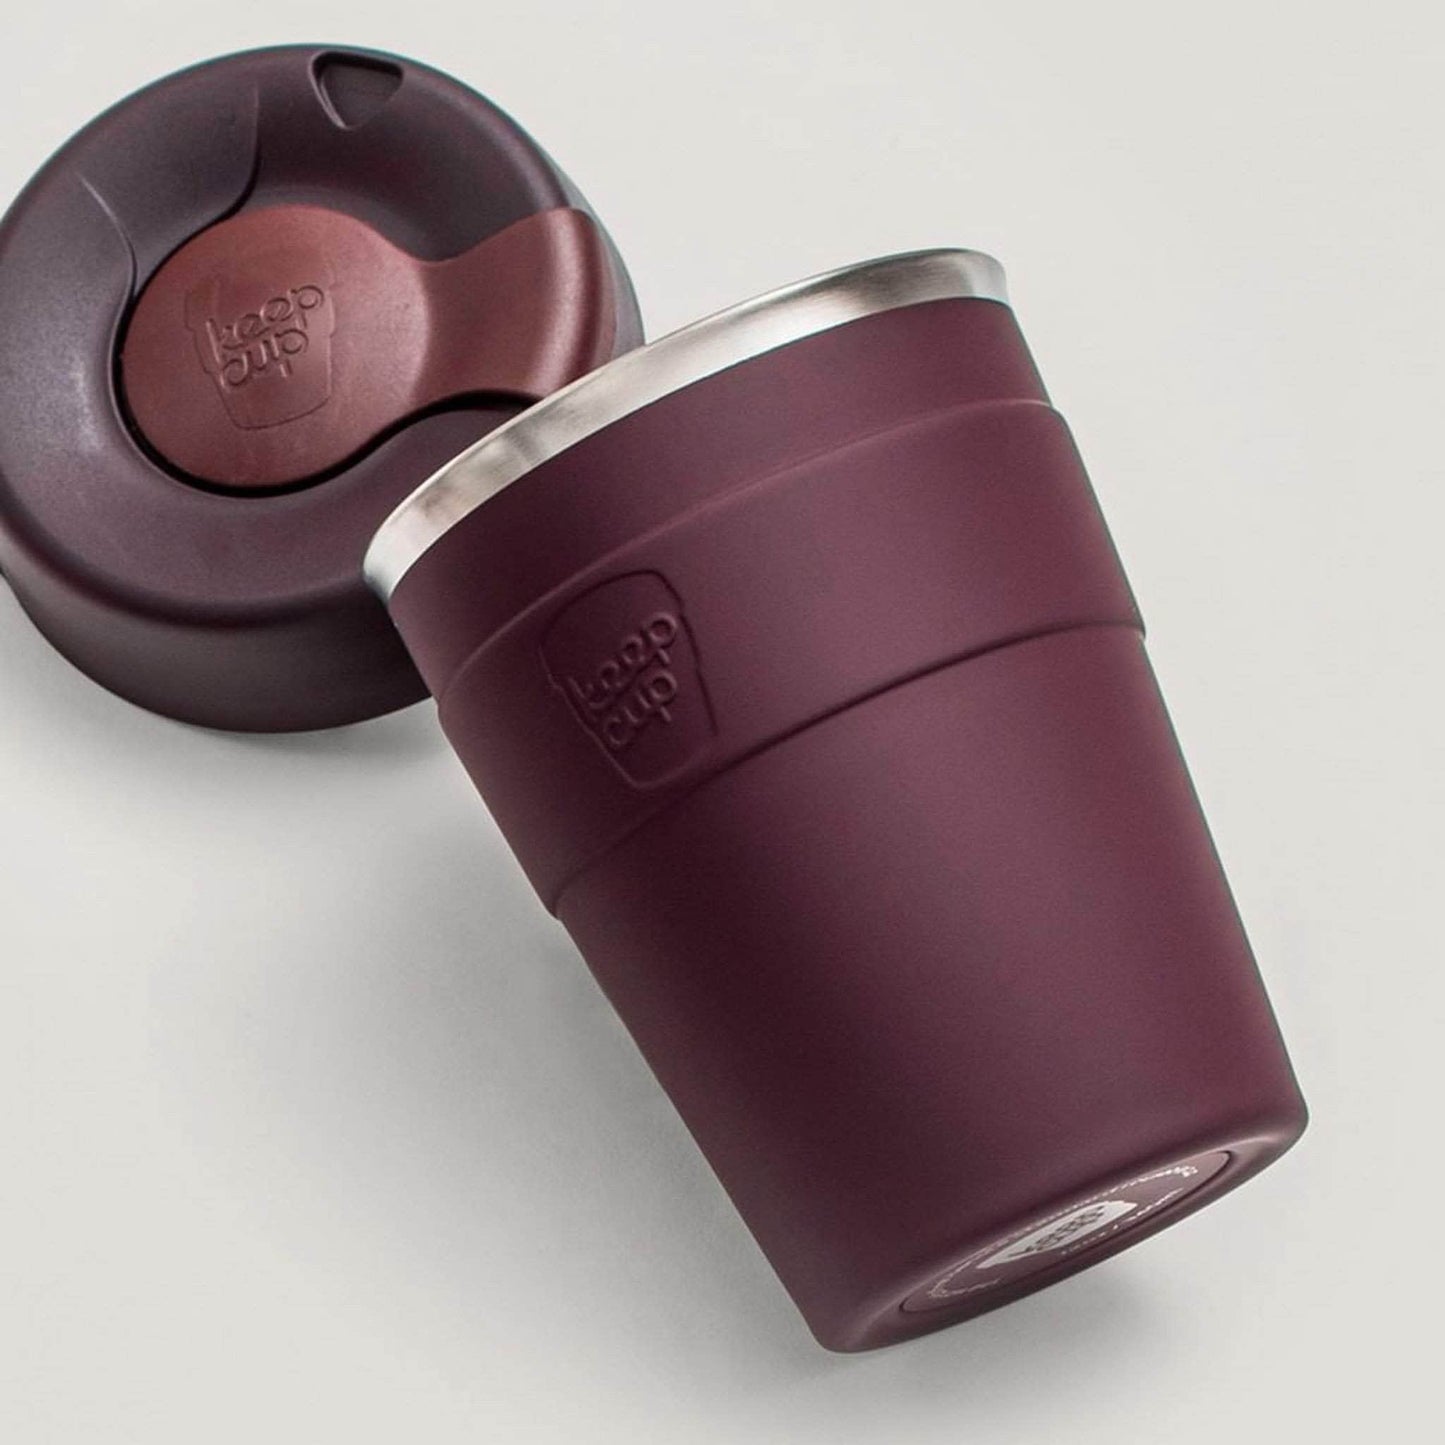 This Is The KeepCup 